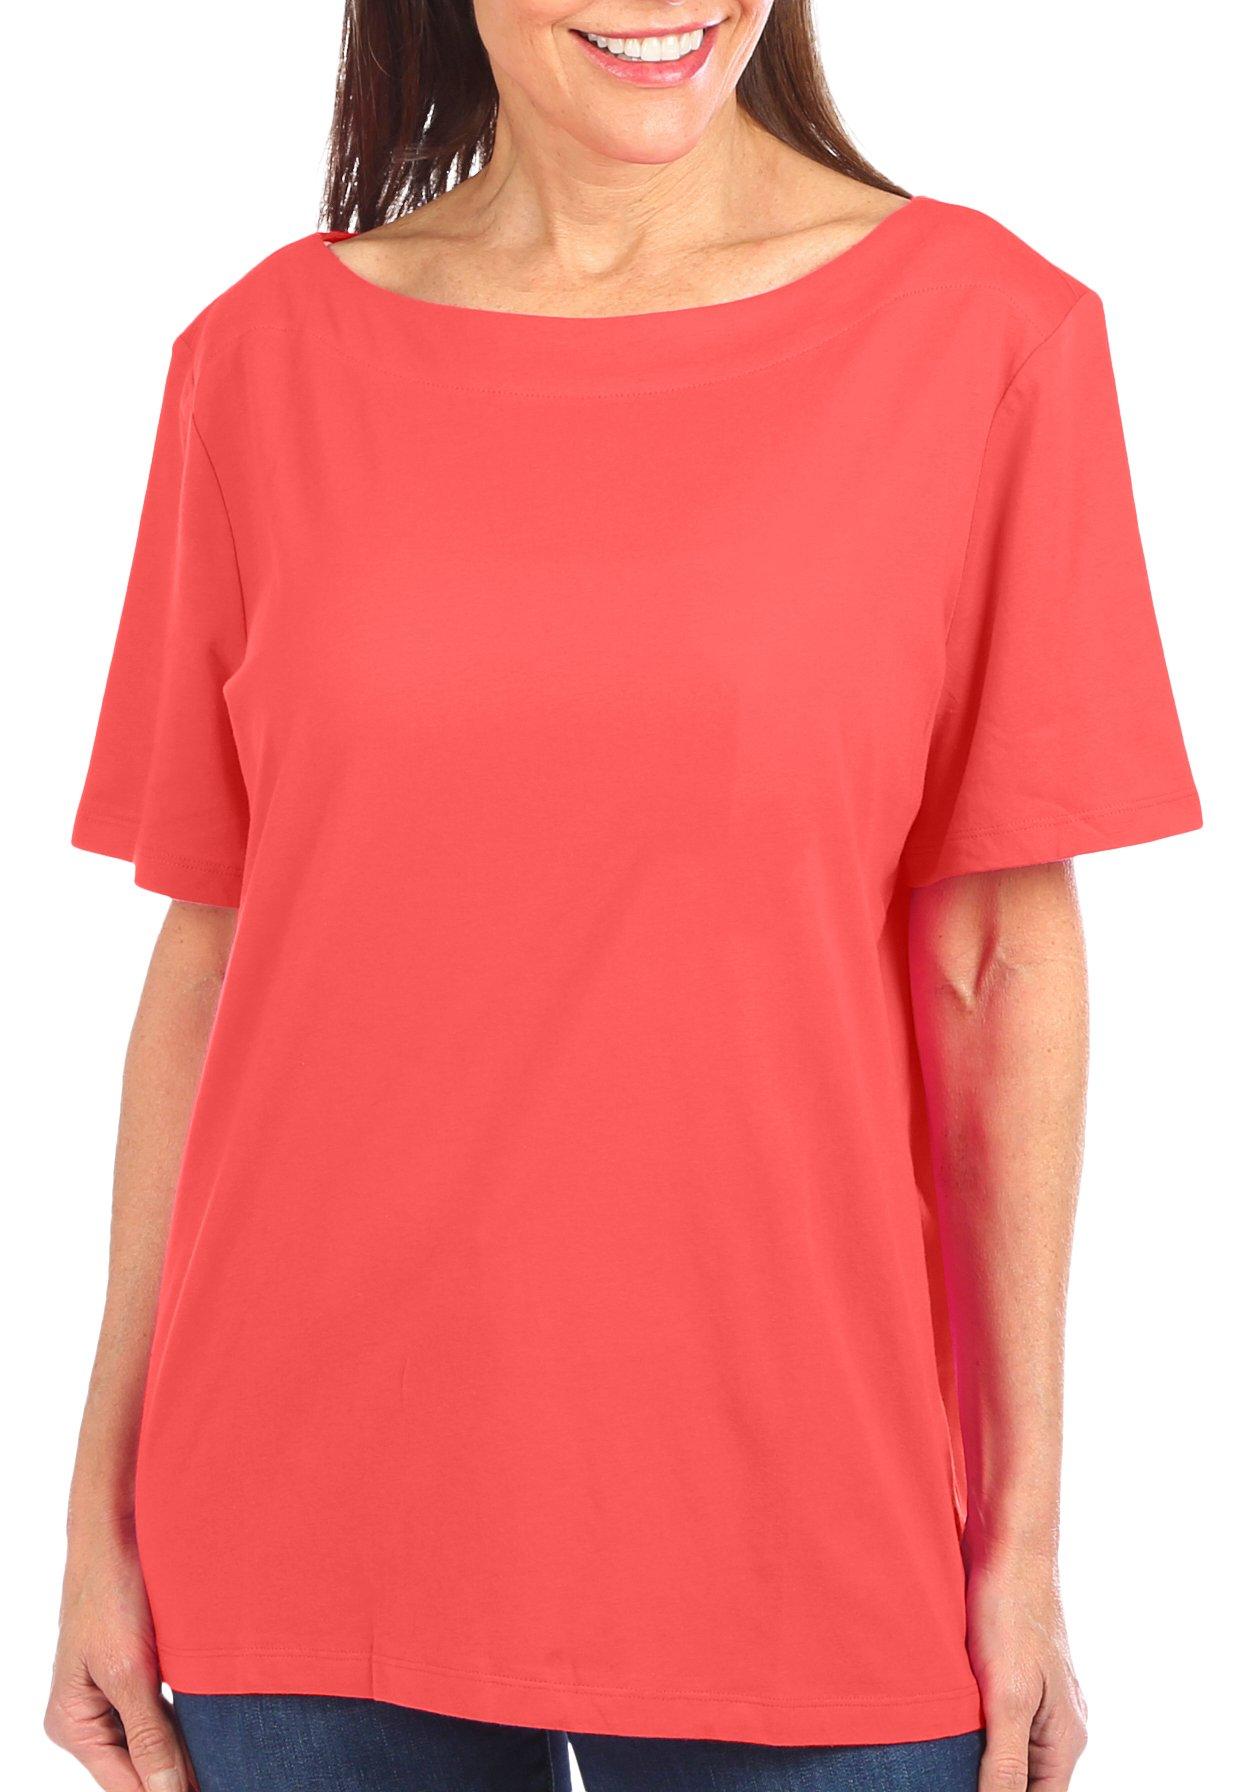 Coral Bay Petite Solid Boat Neck Short Sleeve Top